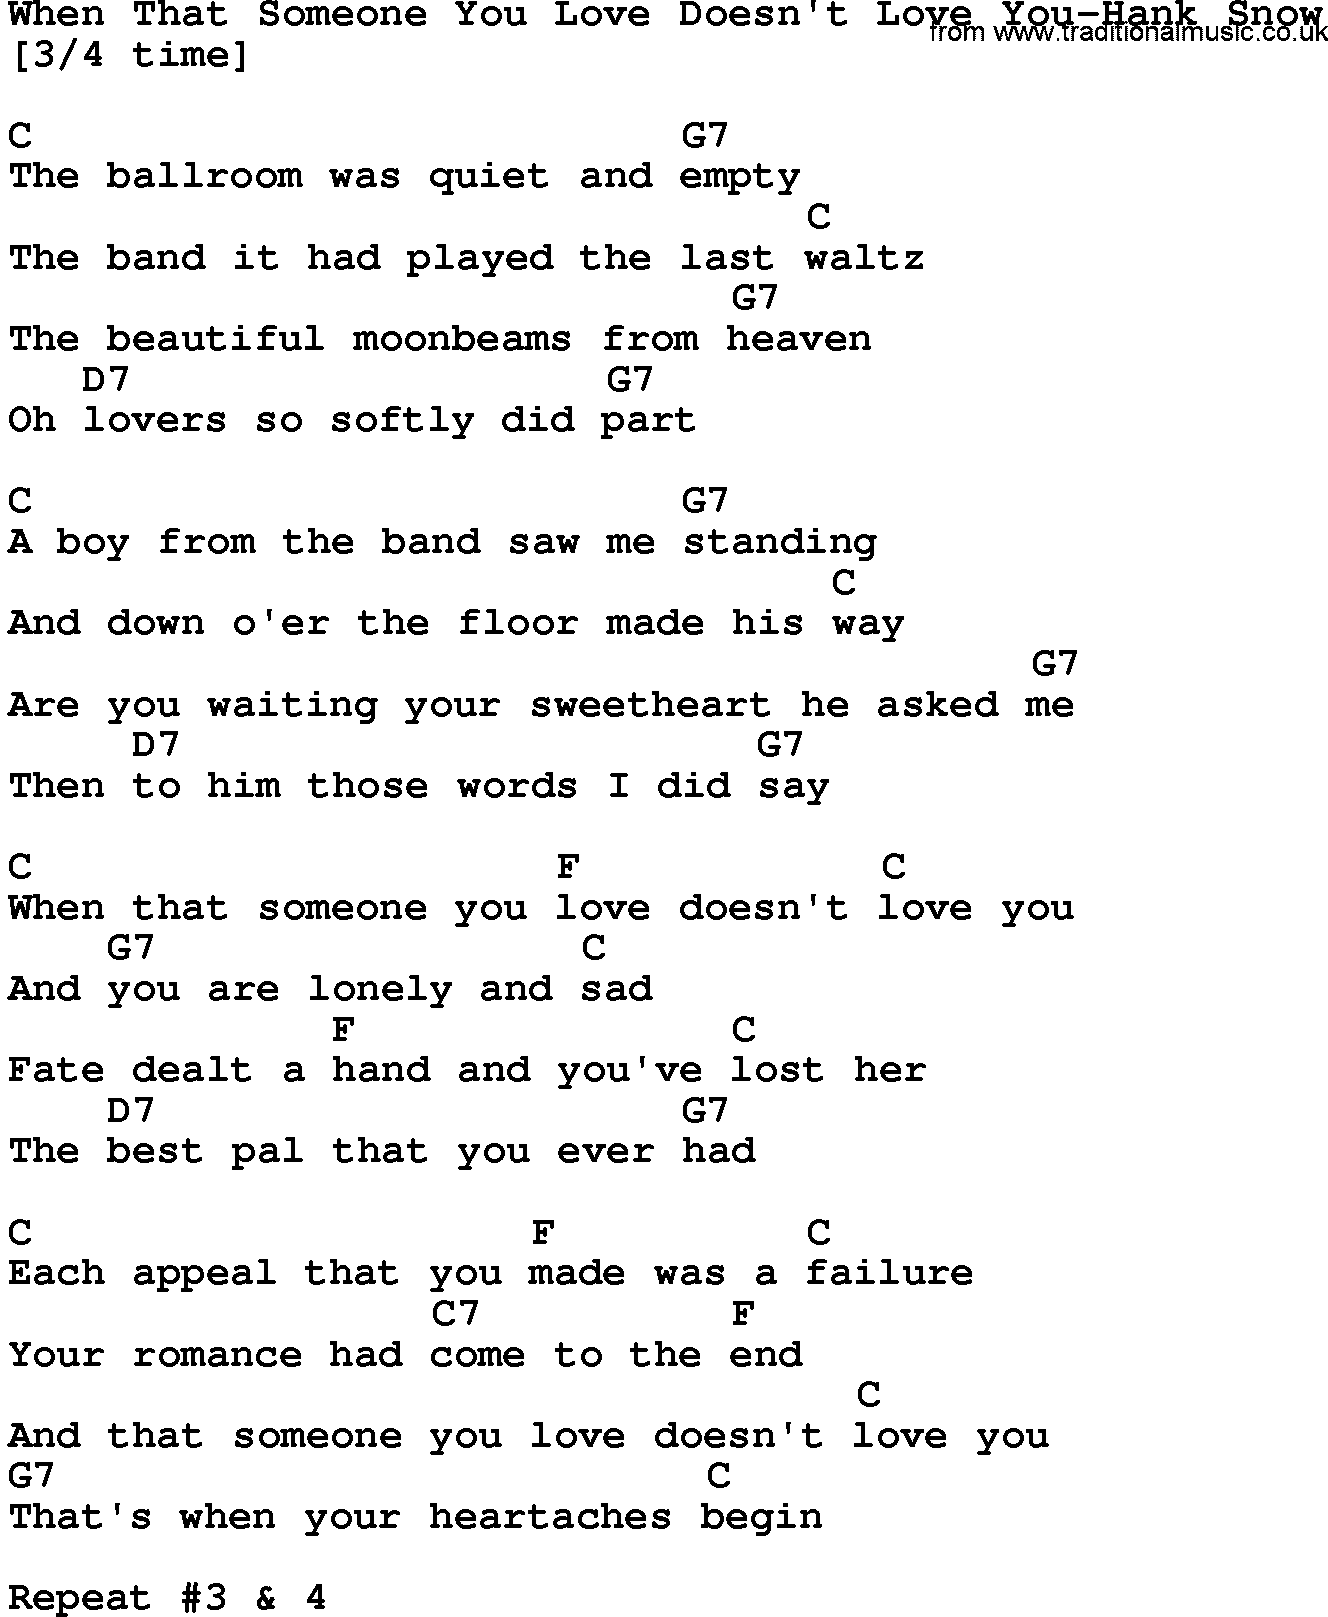 Country music song: When That Someone You Love Doesn't Love You-Hank Snow lyrics and chords